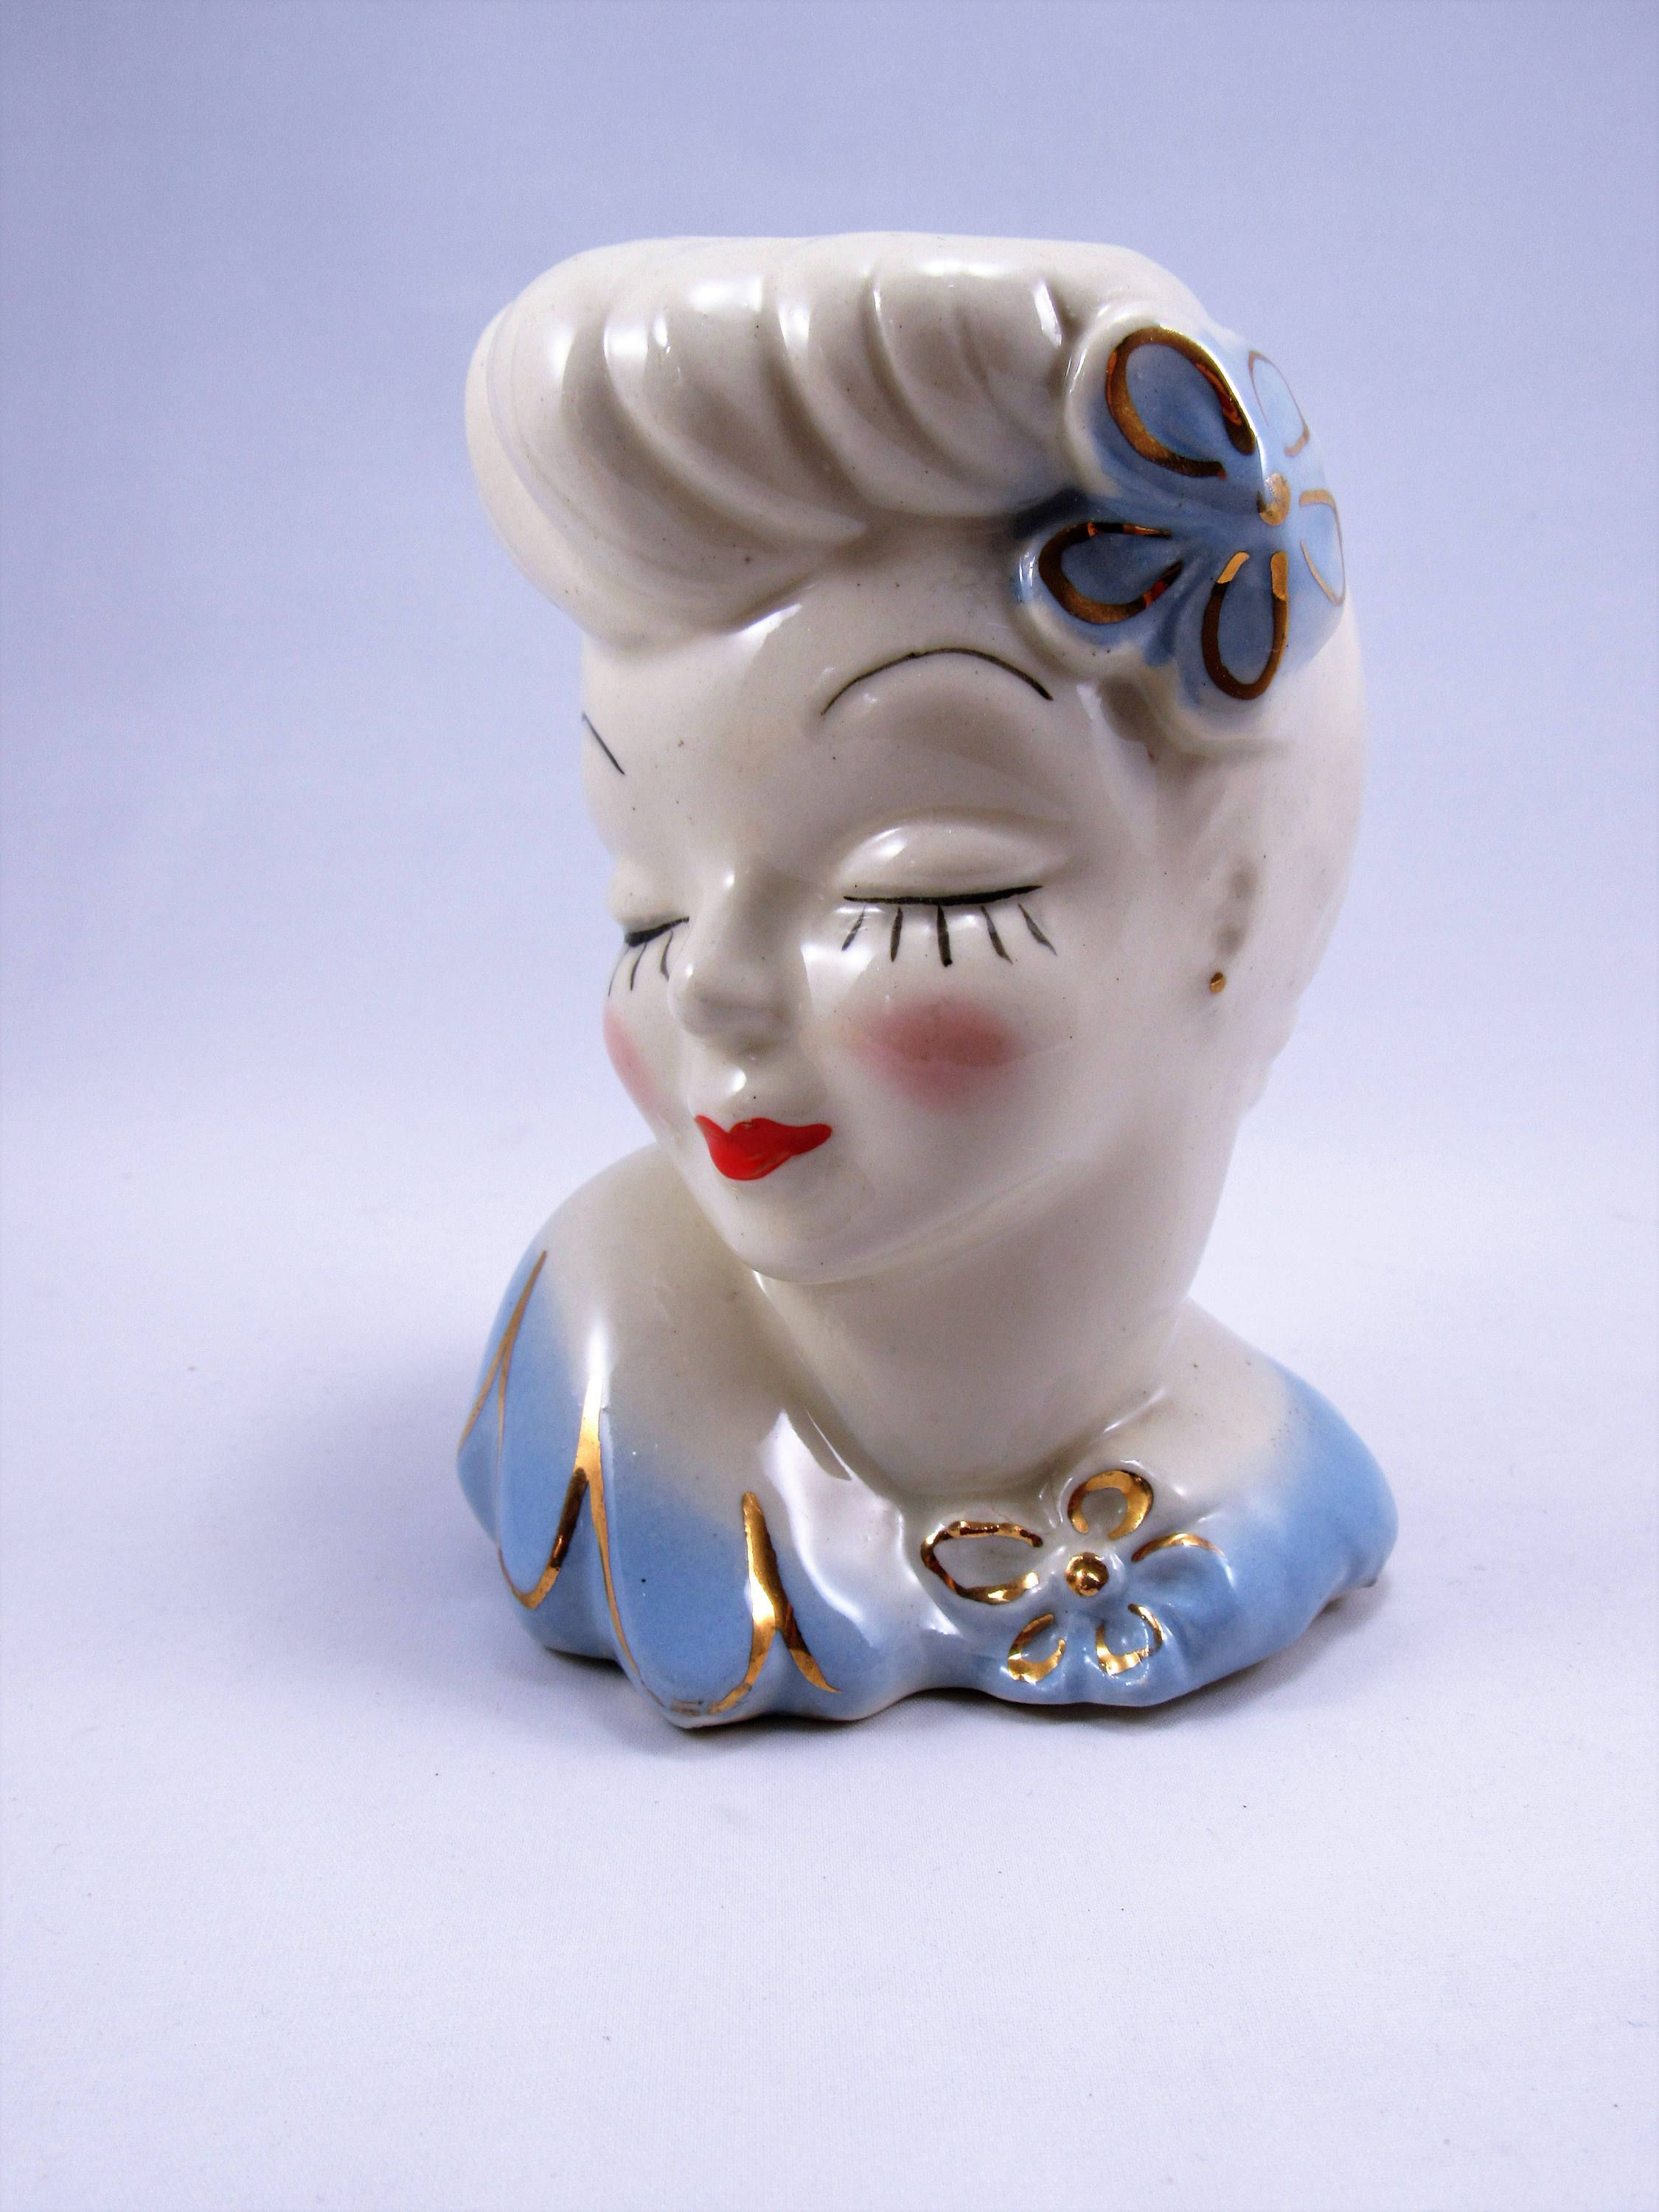 23 Famous Inarco Lady Head Vase 2024 free download inarco lady head vase of josef originals vintage 1960s year 6 birthday angel figurine the with the little girl with black eyes holding birthday cake is 3 1 2 tall josef originals figurines